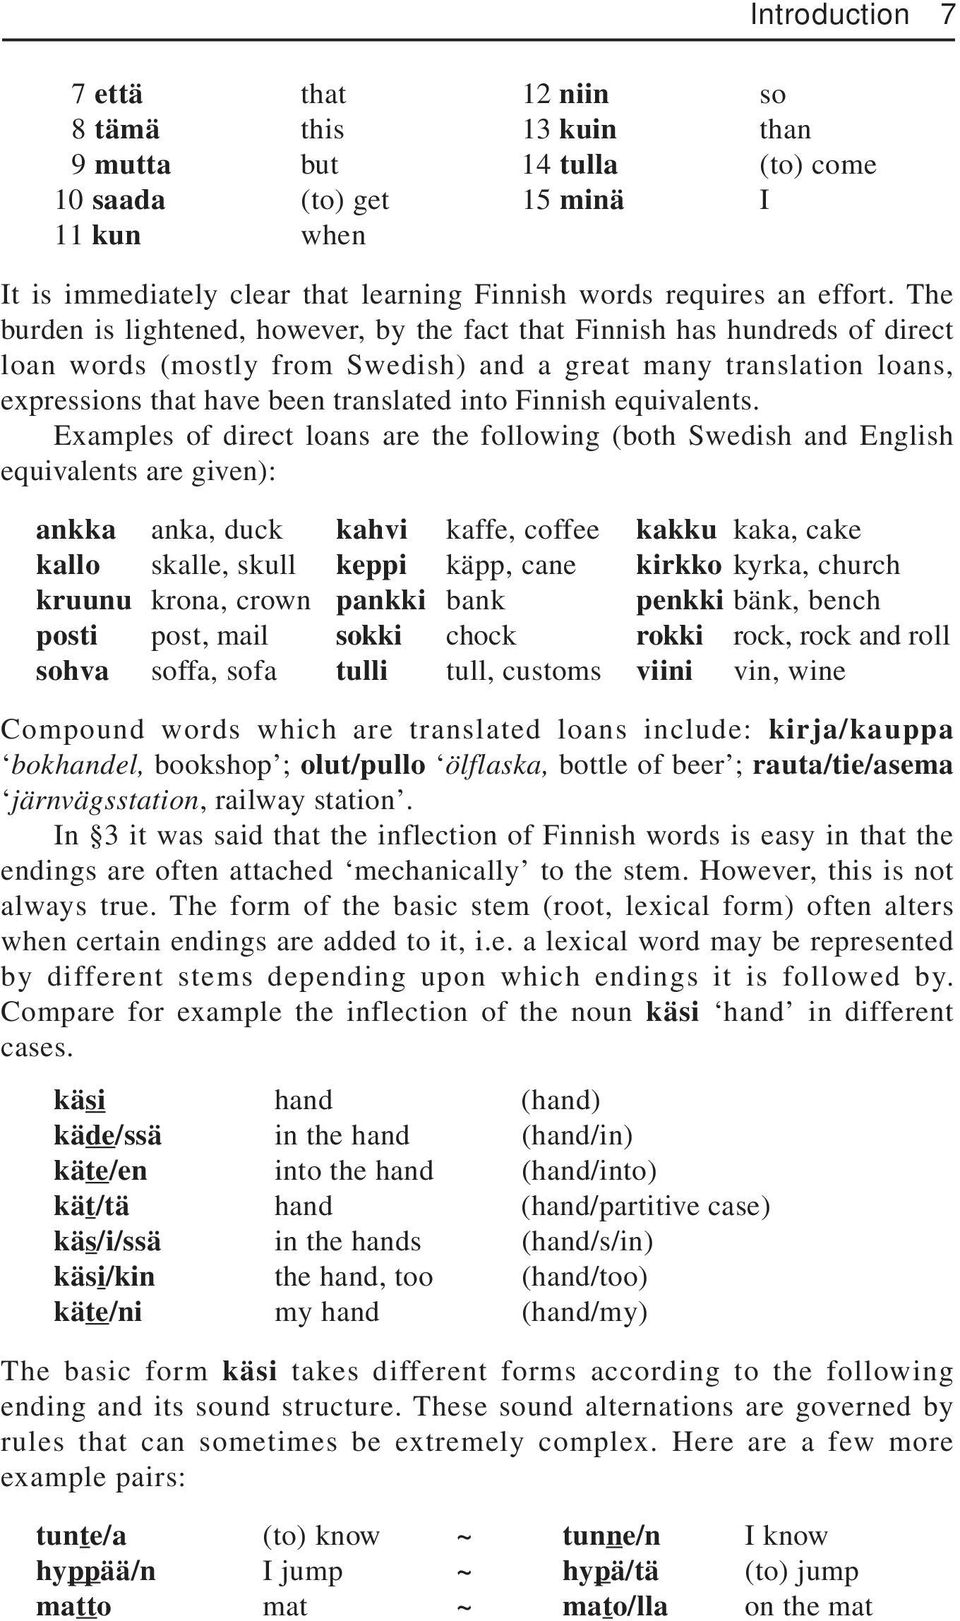 The burden is lightened, however, by the fact that Finnish has hundreds of direct loan words (mostly from Swedish) and a great many translation loans, expressions that have been translated into